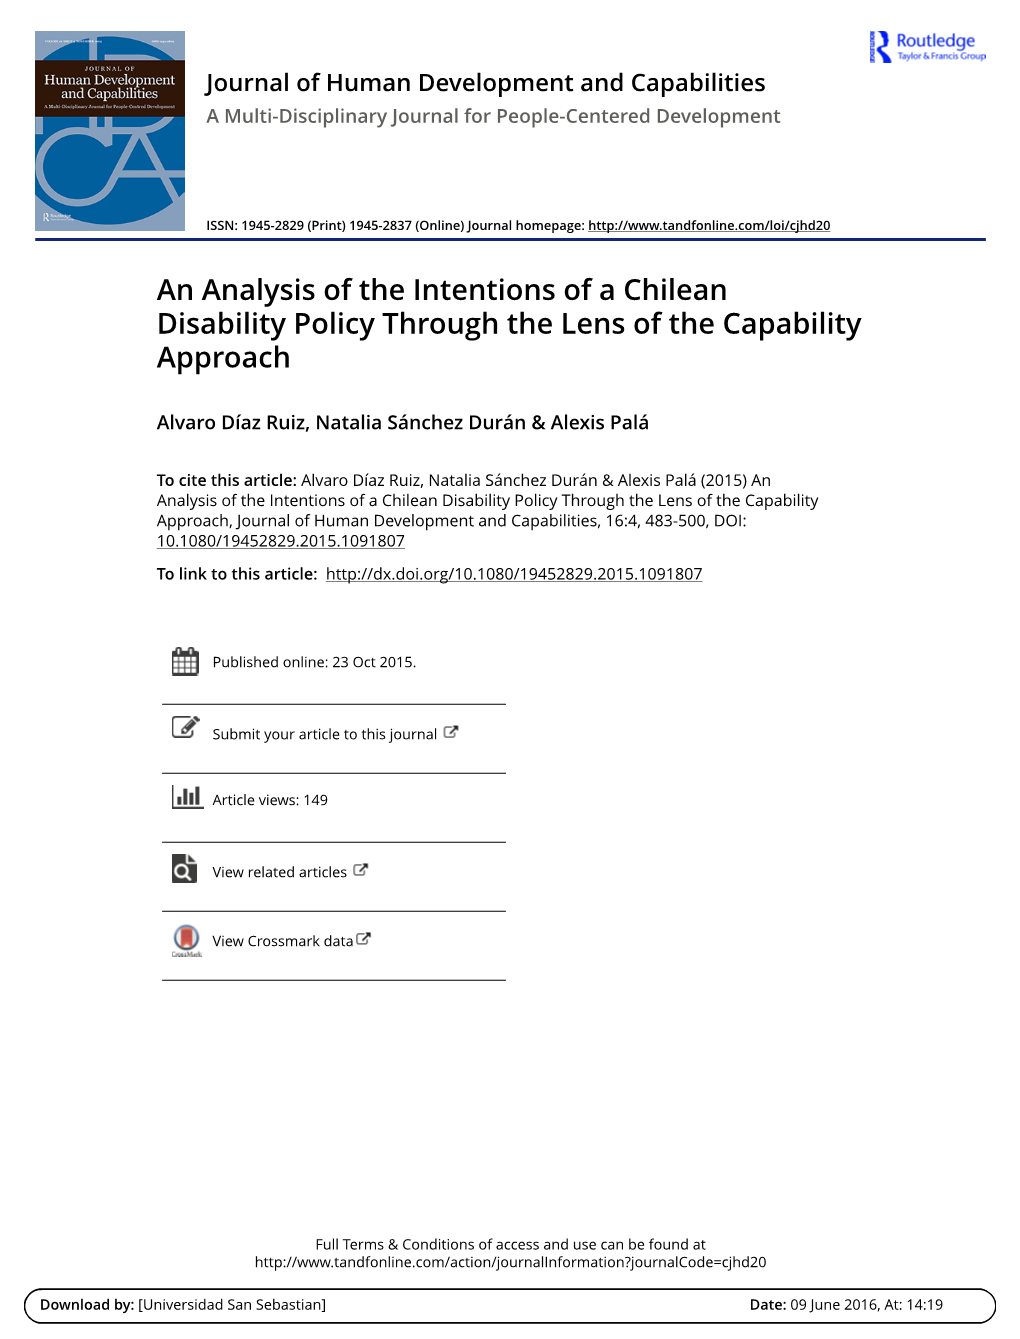 An Analysis of the Intentions of a Chilean Disability Policy Through the Lens of the Capability Approach